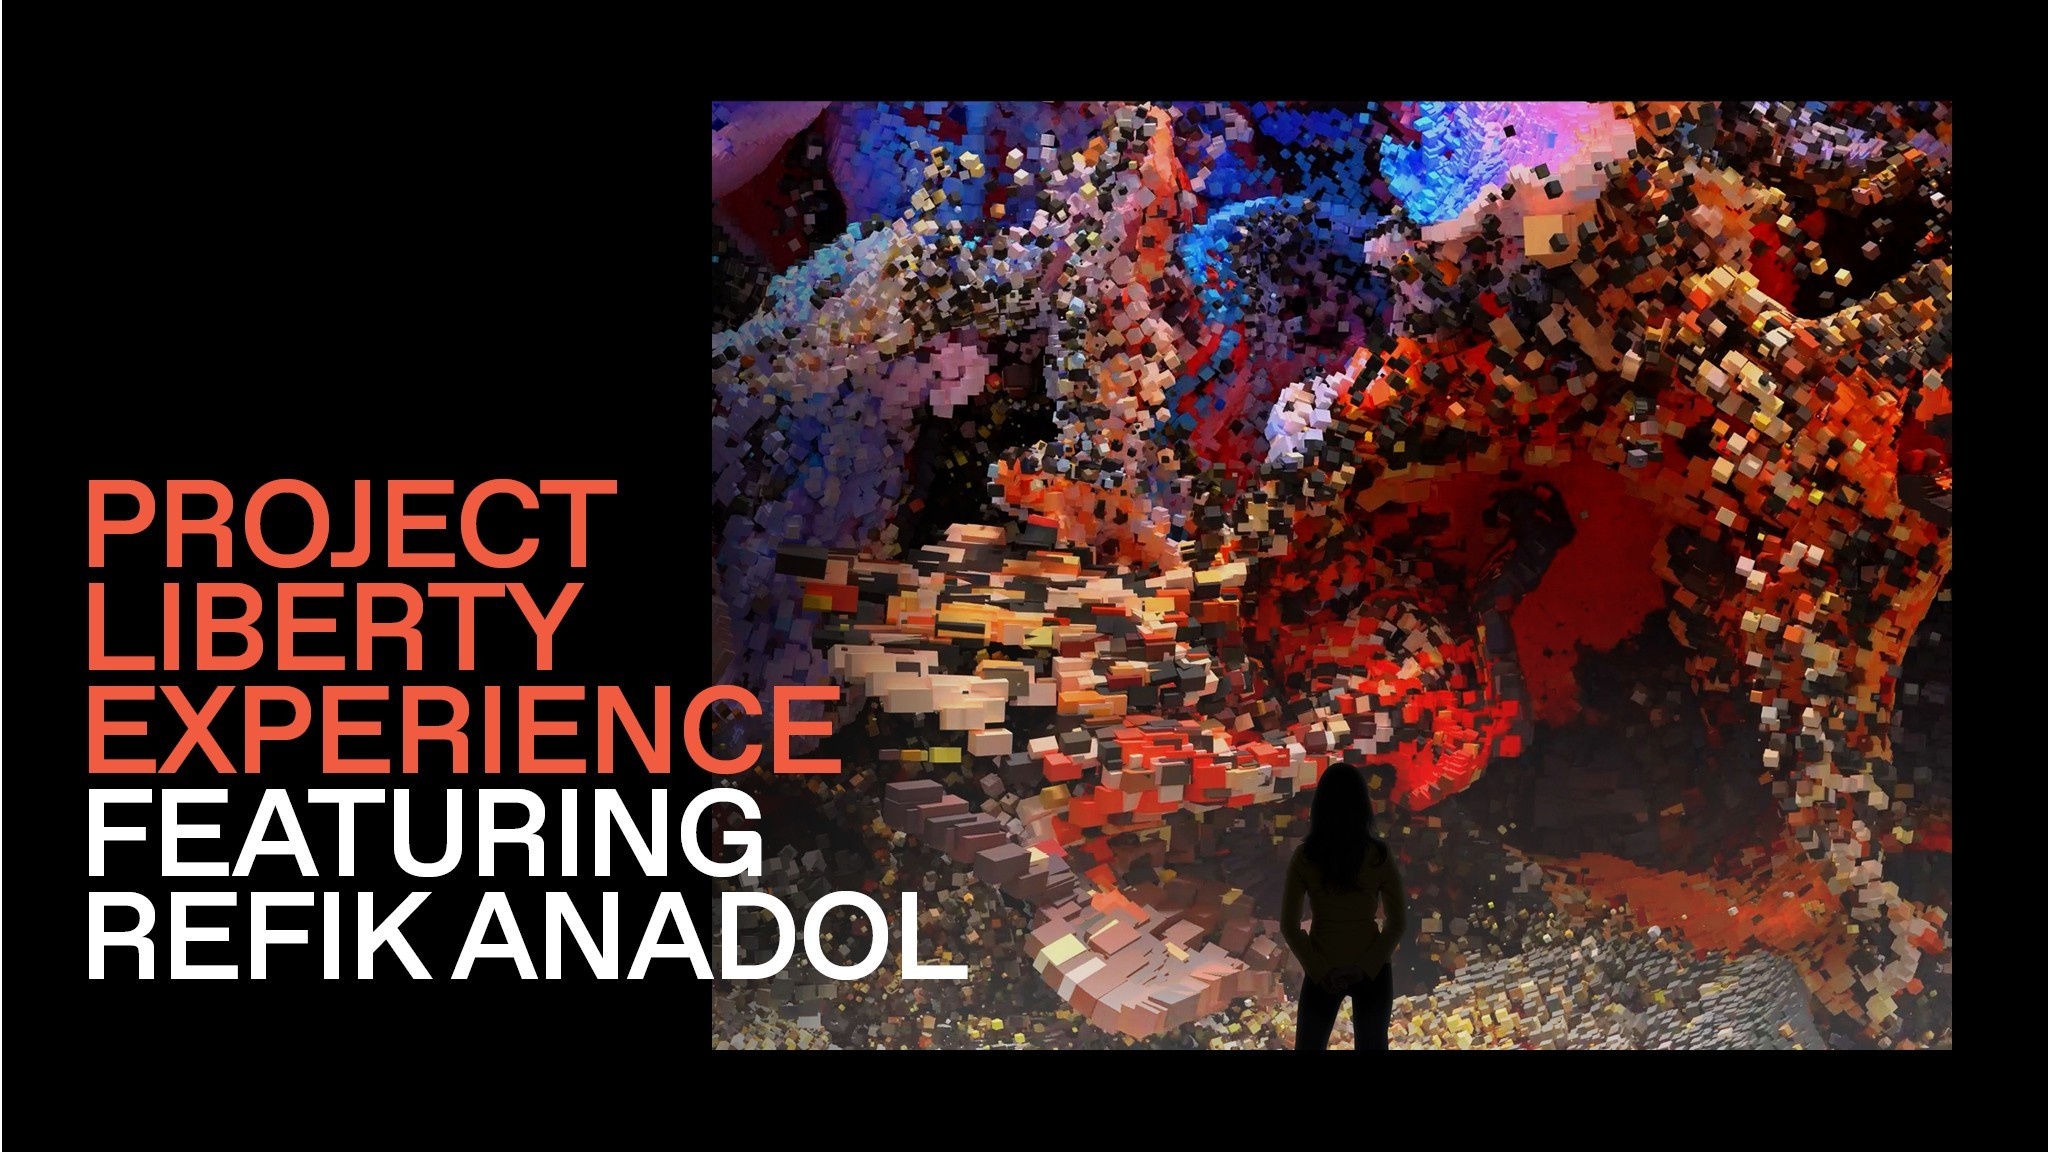 The silhouette of a person against a tall colorful video installation, overlaid to the side is the title "Project Liberty Experience featuring Refik Anadol"